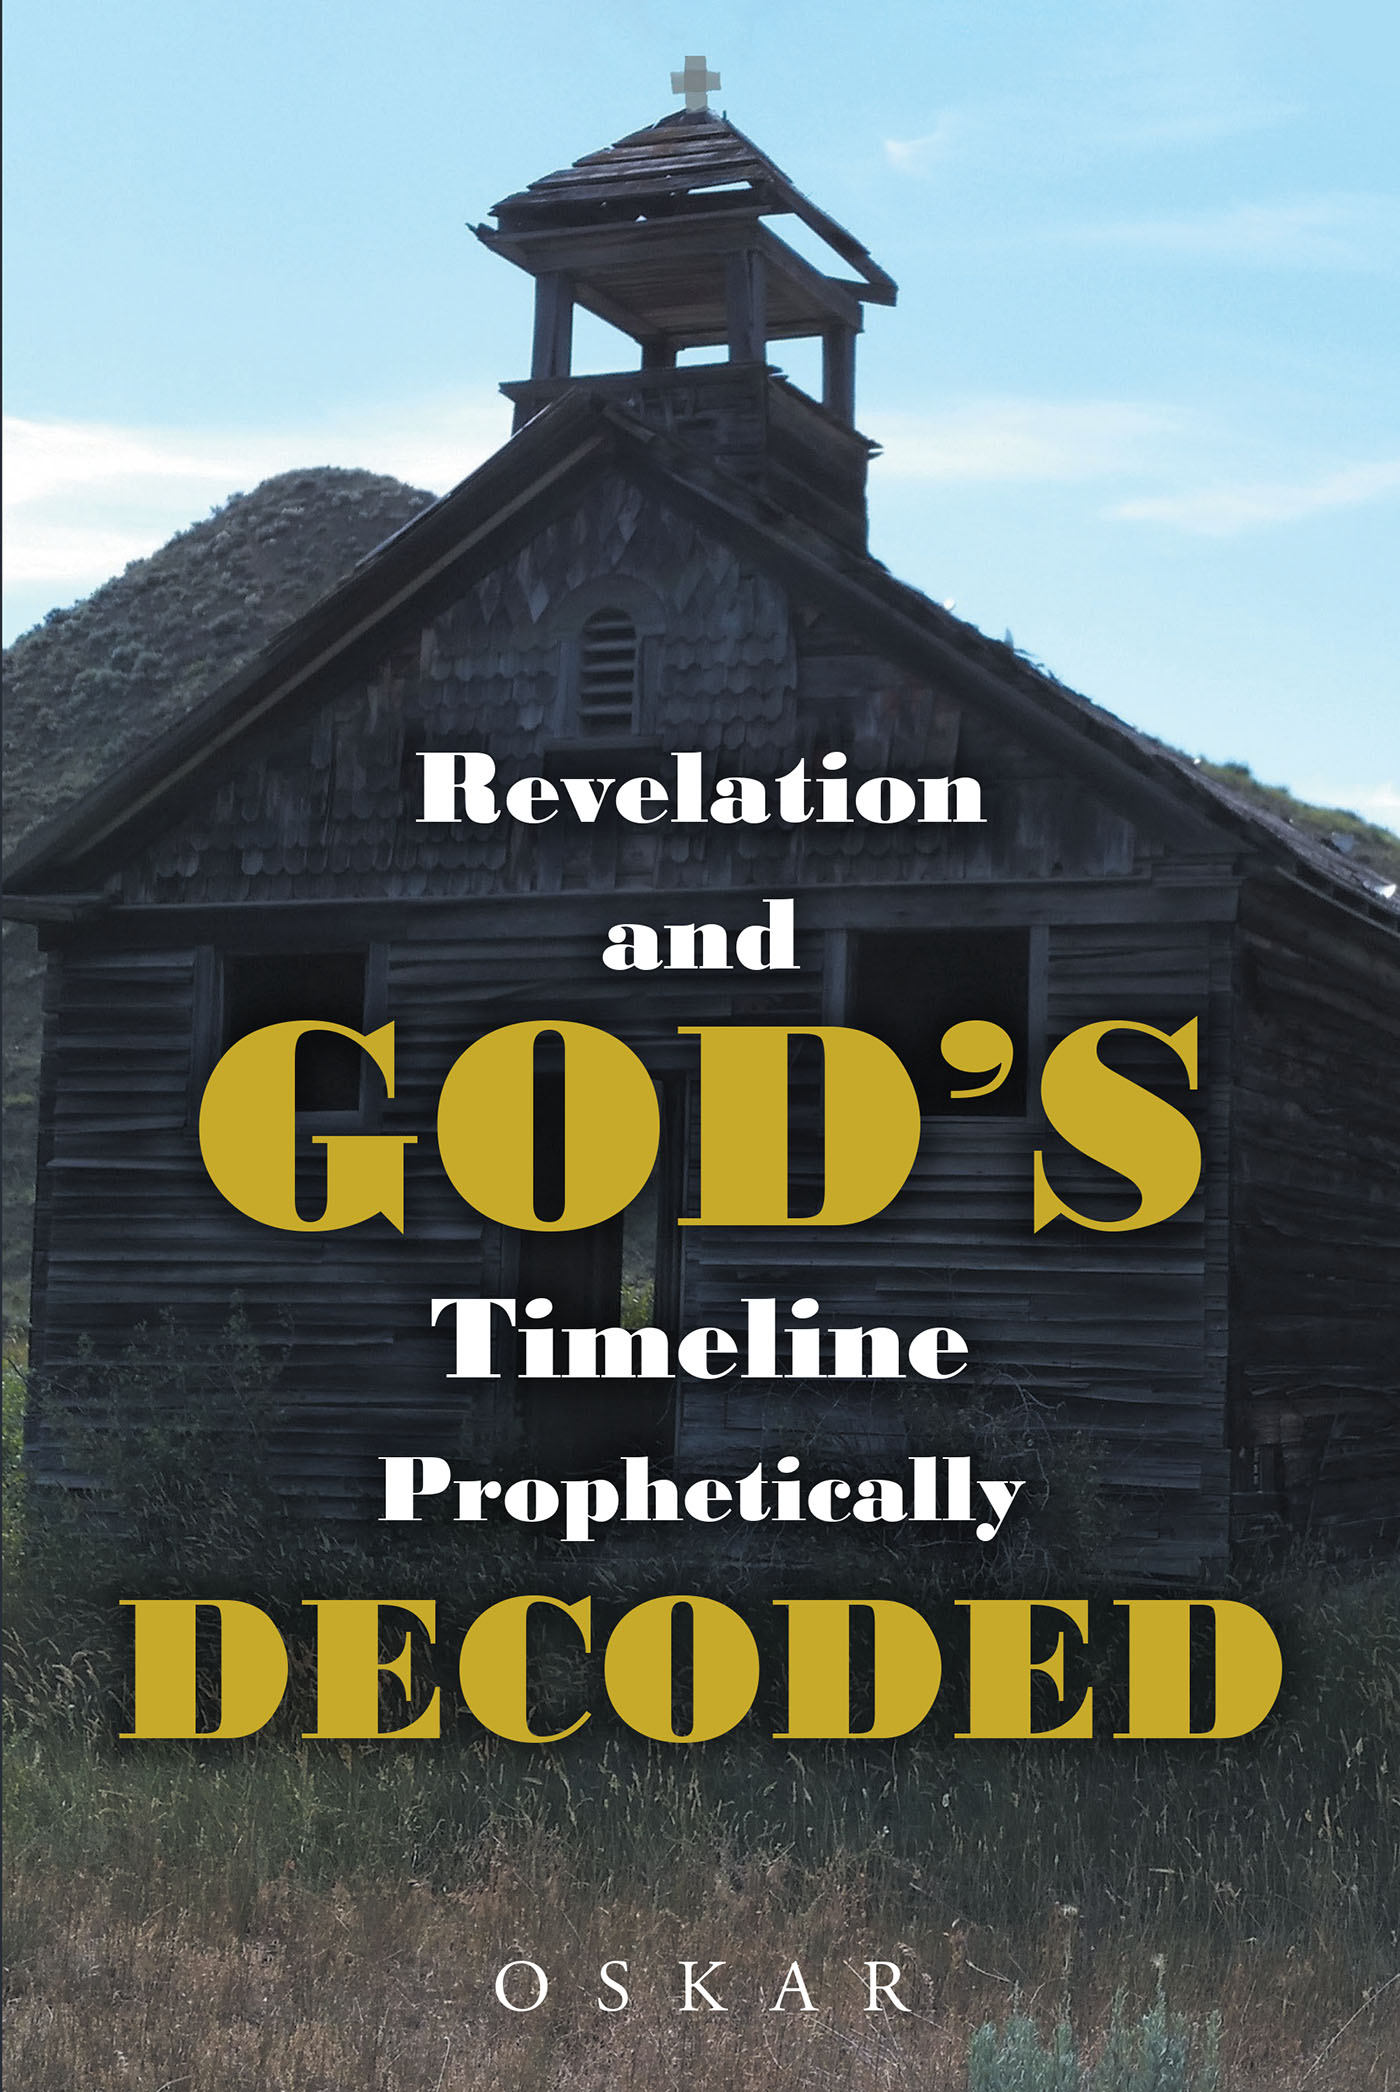 OSKAR’s Newly Released "Revelation and God’s Timeline Prophetically Decoded" is an Engaging Discussion of Prophetic Scripture and Modern Events